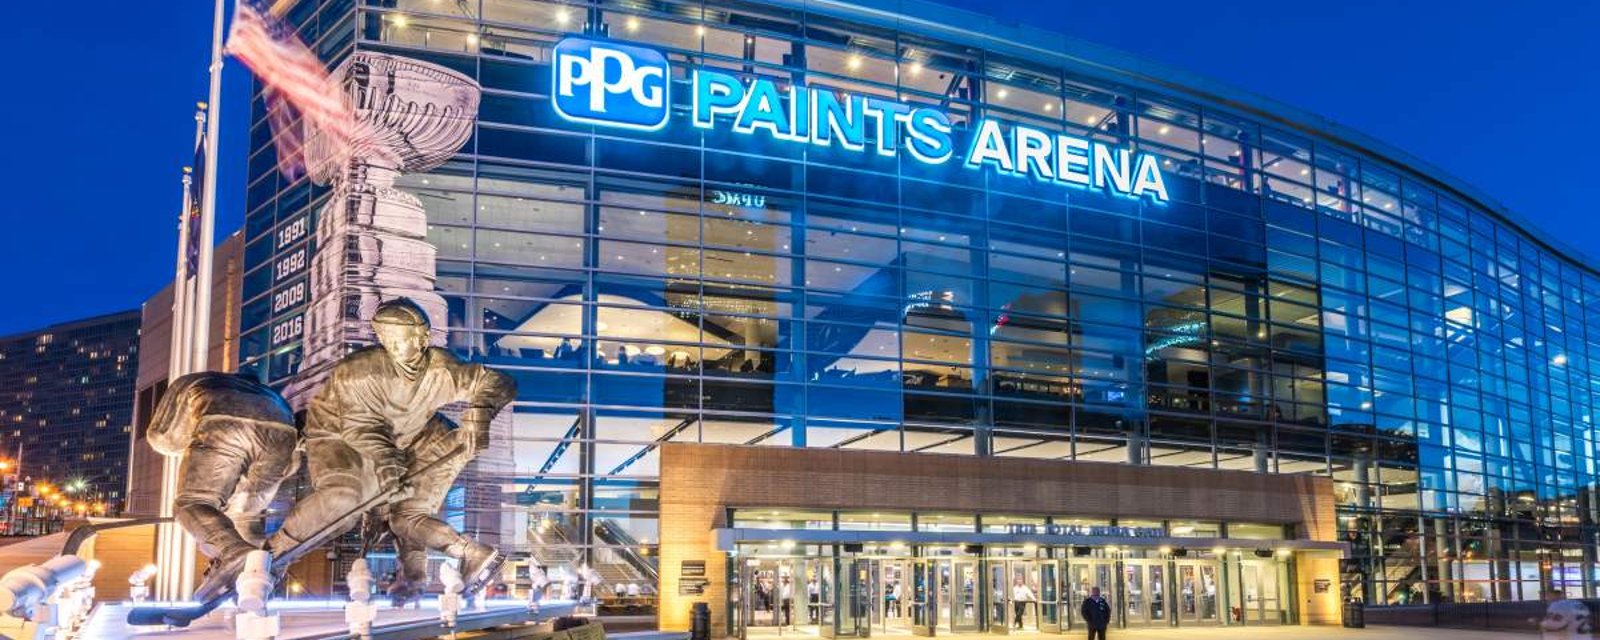 New Penguins scoreboard at PPG Paints Arena is a beauty 